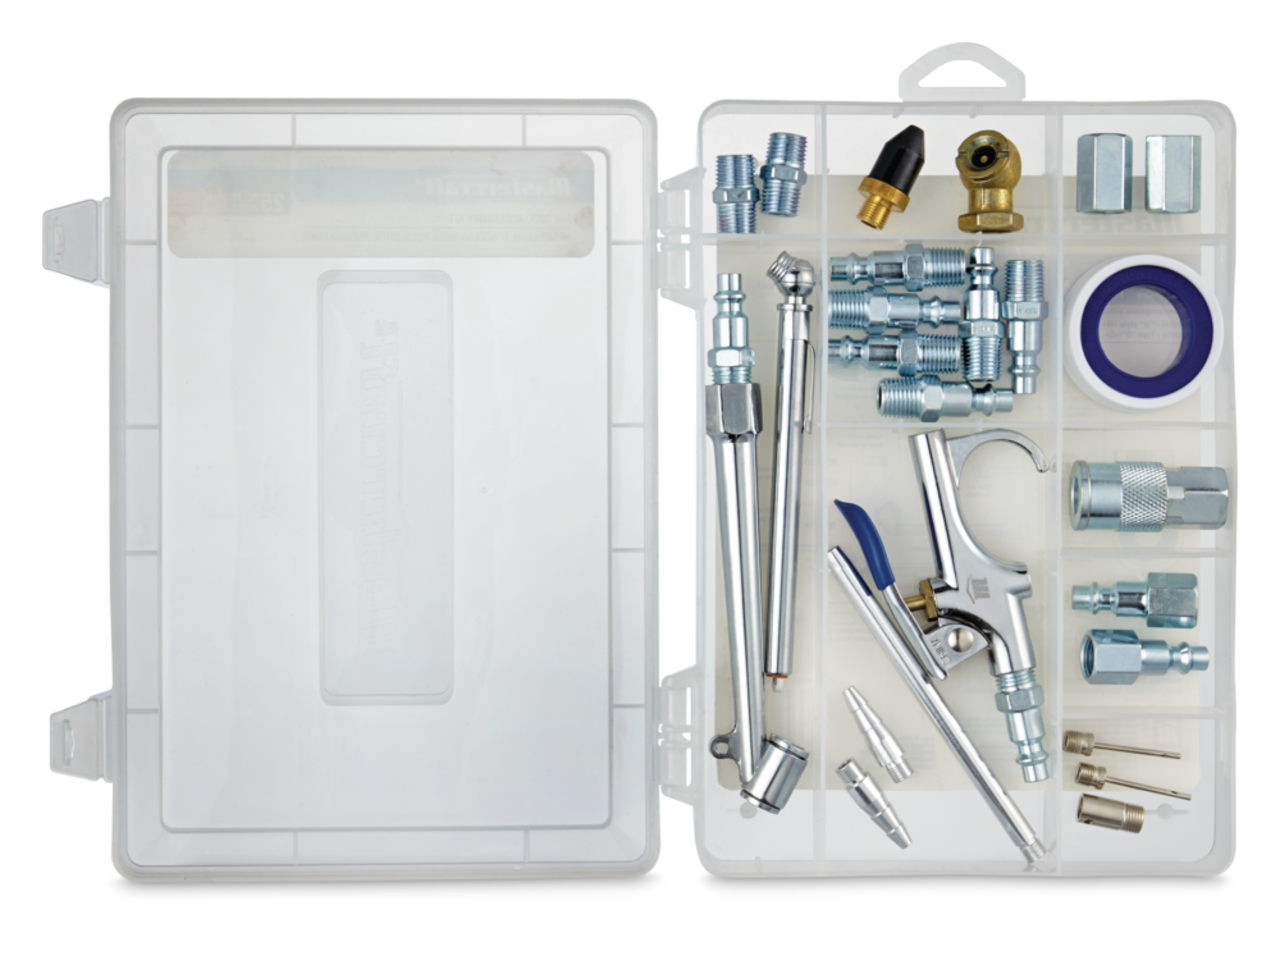 https://media-www.canadiantire.ca/product/fixing/tools/air-tools-accessories/0588140/mastercraft-25pc-air-accessory-kit-with-case-702ee664-5fc0-4a29-a59b-937ccc34016e.png?imdensity=1&imwidth=640&impolicy=mZoom